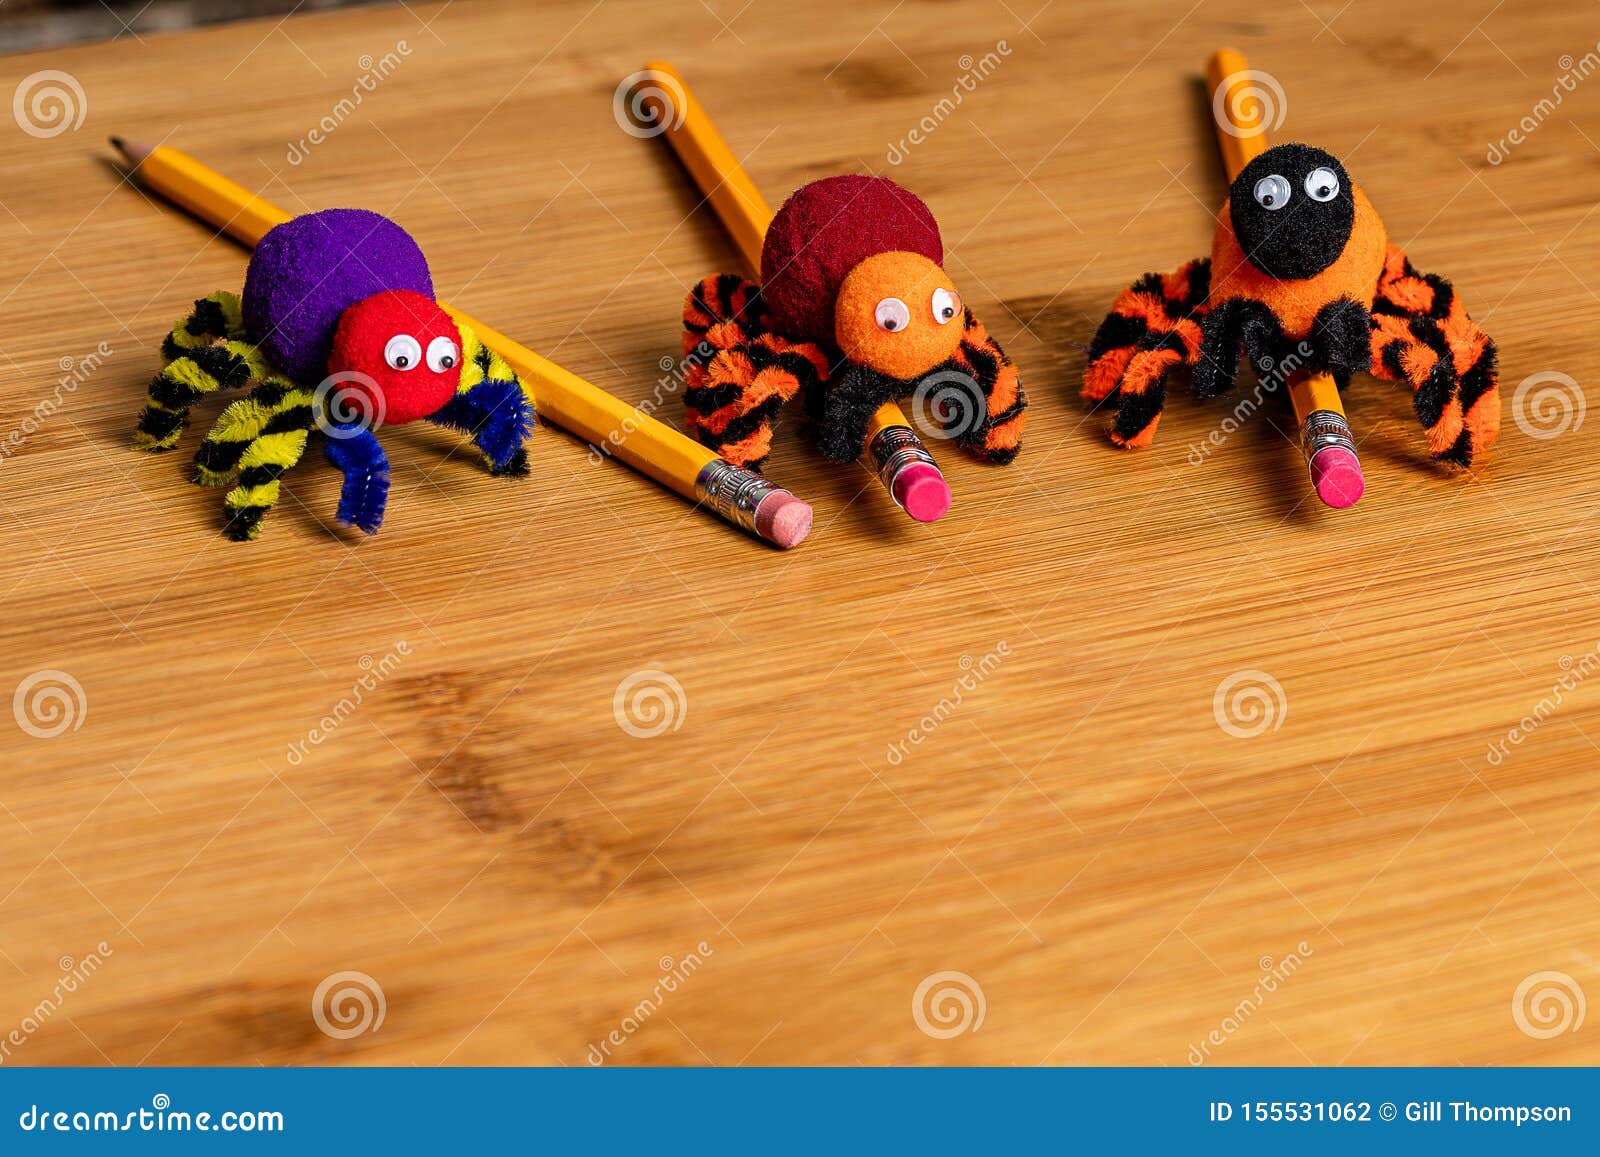 Halloween Finger Puppets from Pipe Cleaners and Pom Poms